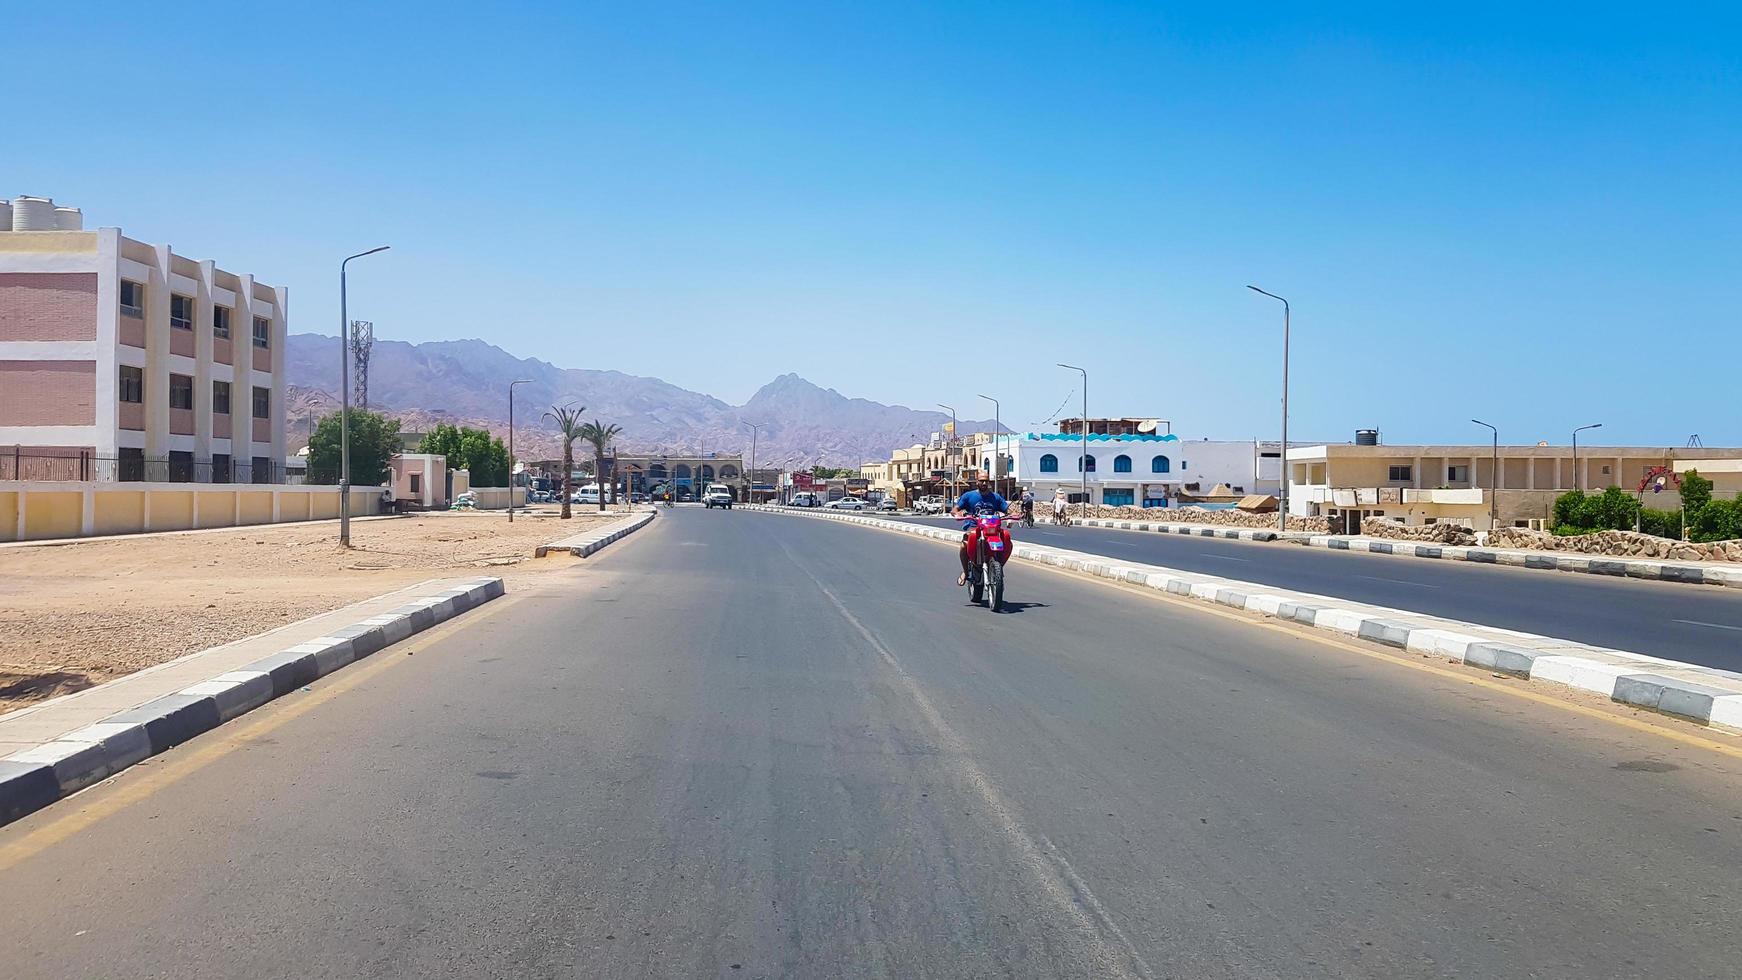 Egypt, Dahab - June 20, 2019. an Arab riding a scooter along one of the streets of Dahab. Desert Street. Egyptian residential buildings. The city of Dahab. photo